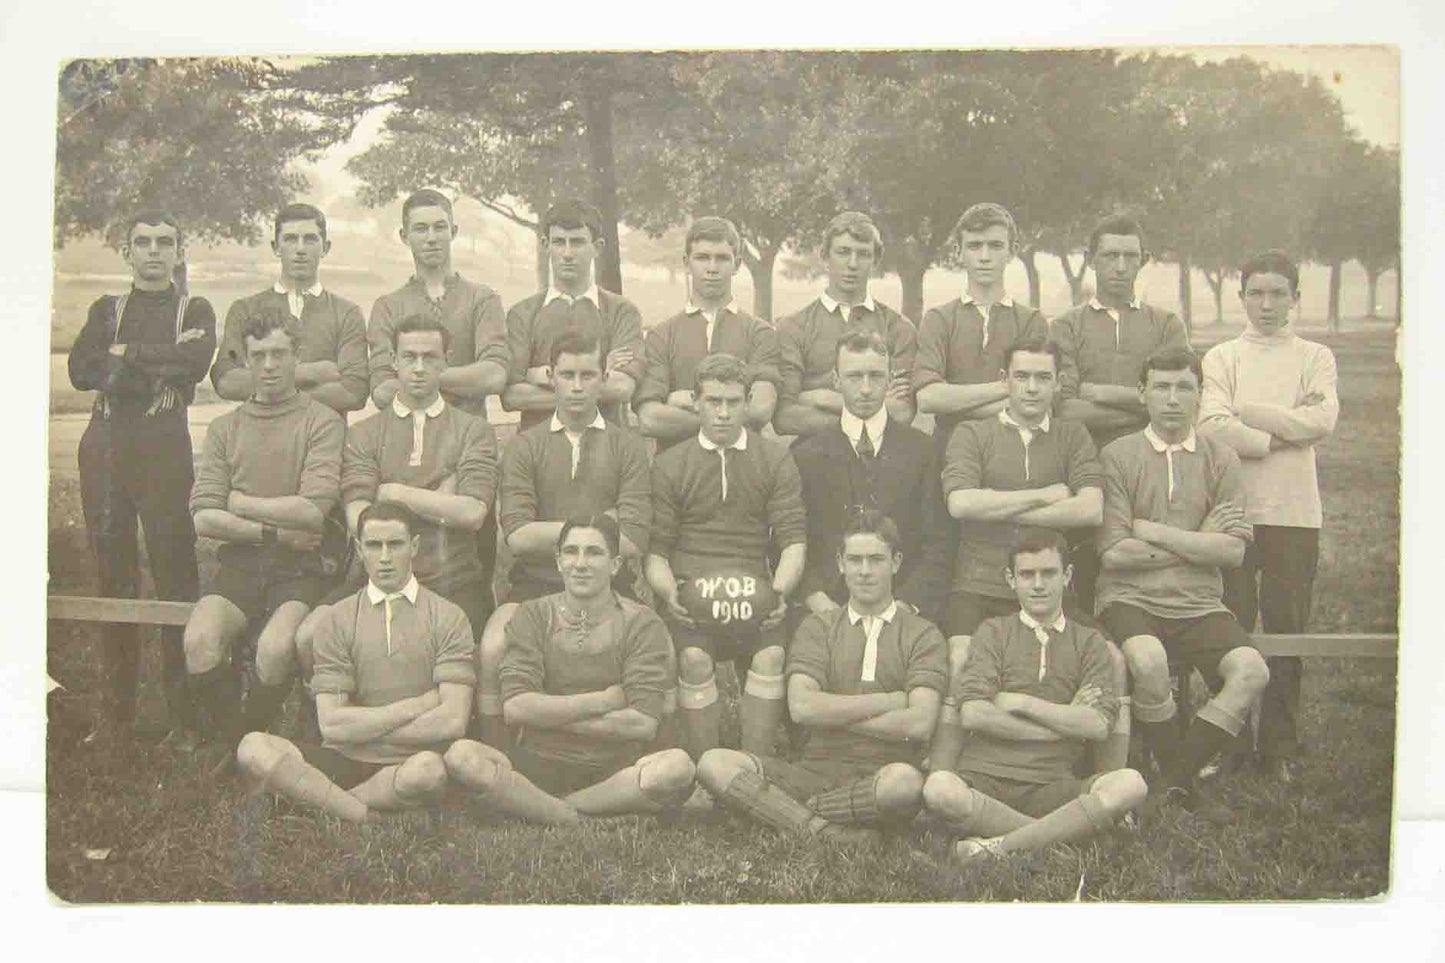 Postcard in black and white of an unknown football team in unused condition.